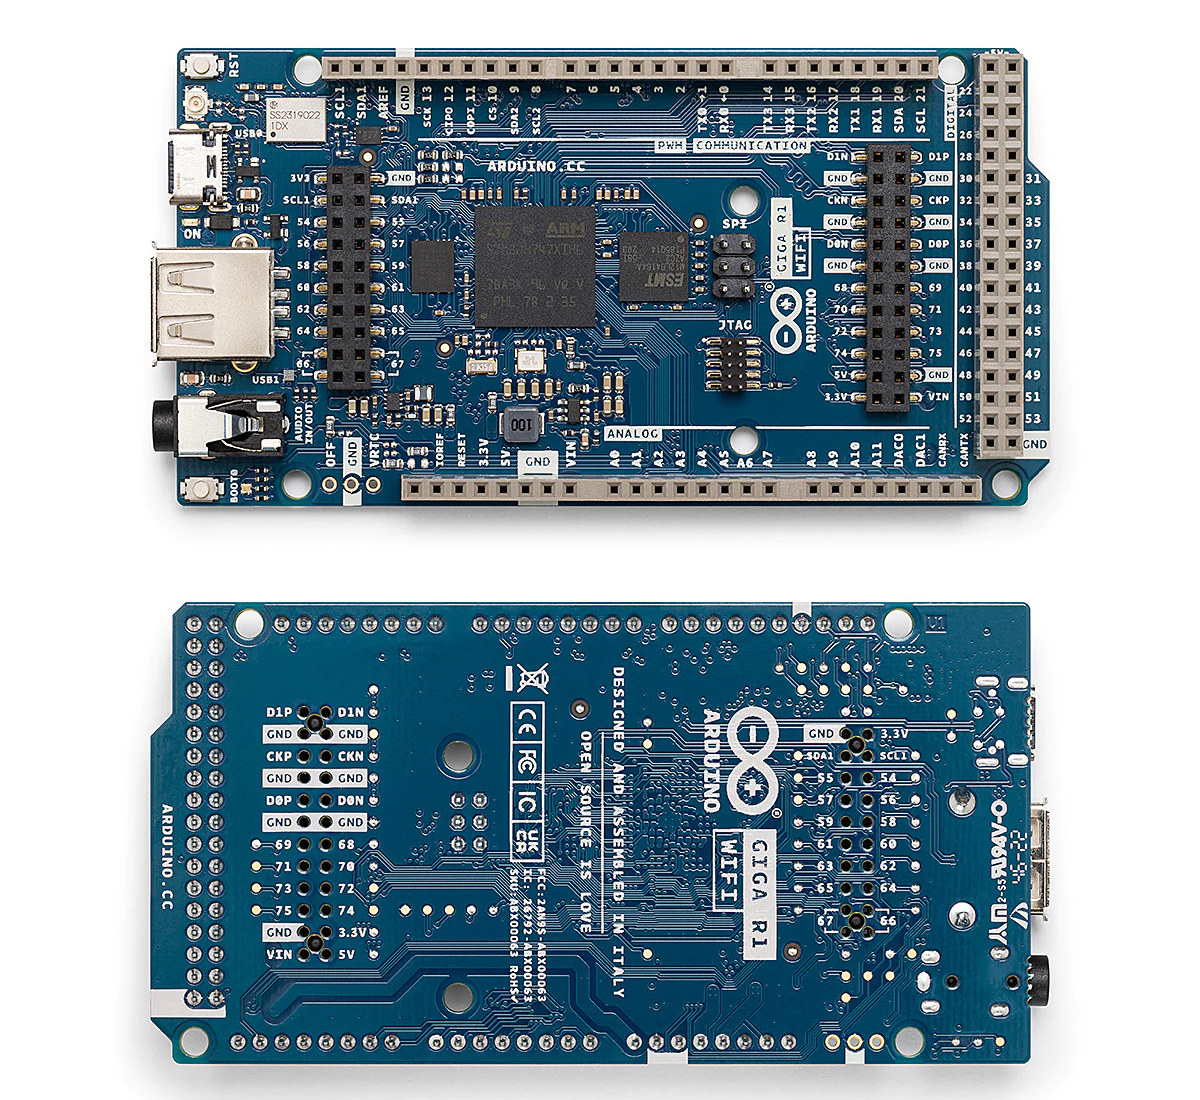 Arduino GIGA R1 WiFi board launches with STM32H7 MCU, up to 76 I/O